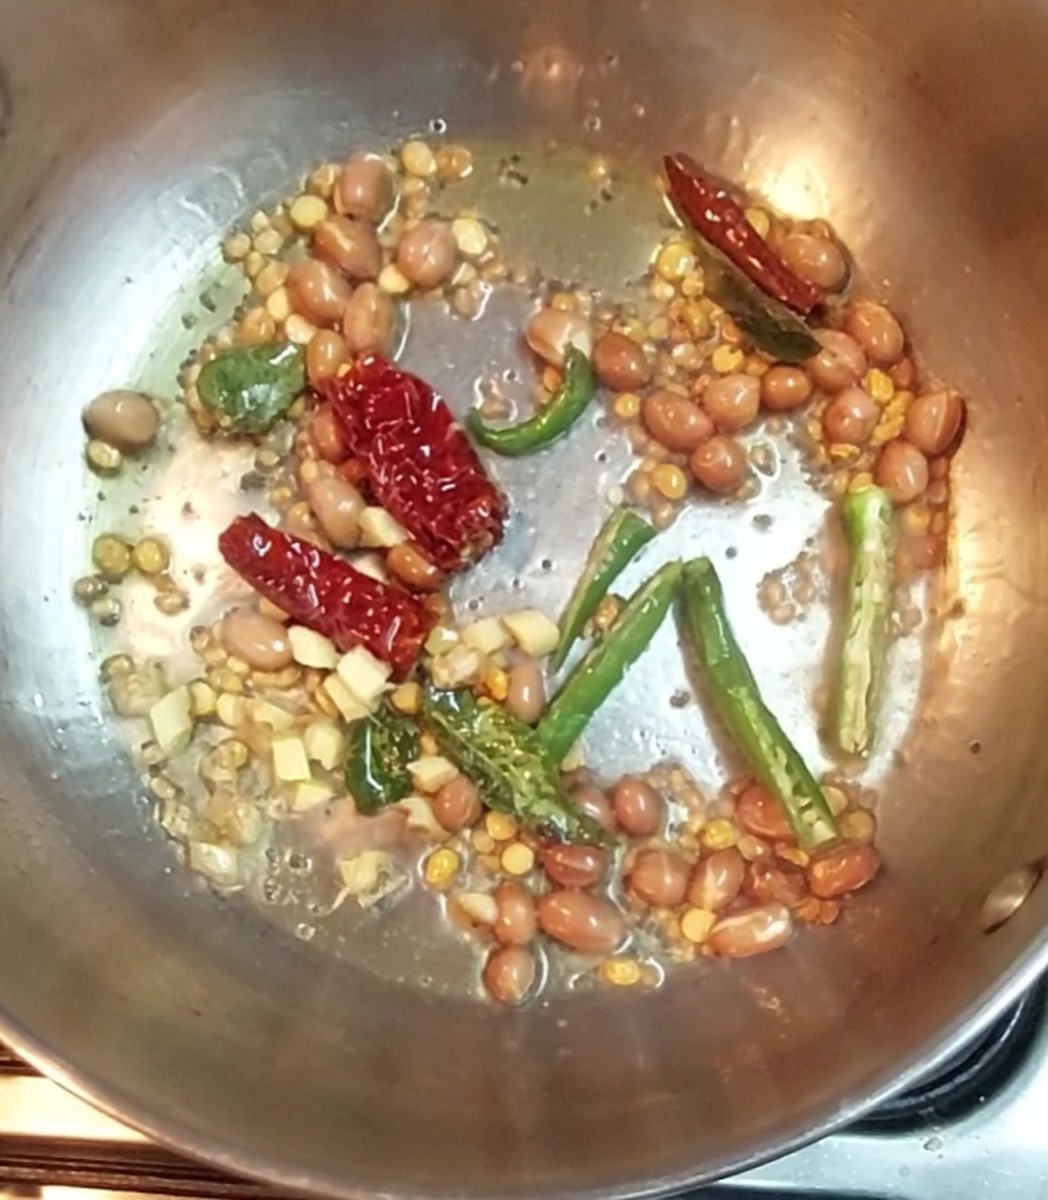 Saute till lentils turn golden brown in color. Do not burn. Add 1 teaspoon chopped ginger and 1-2 green chilies. Saute for a second.